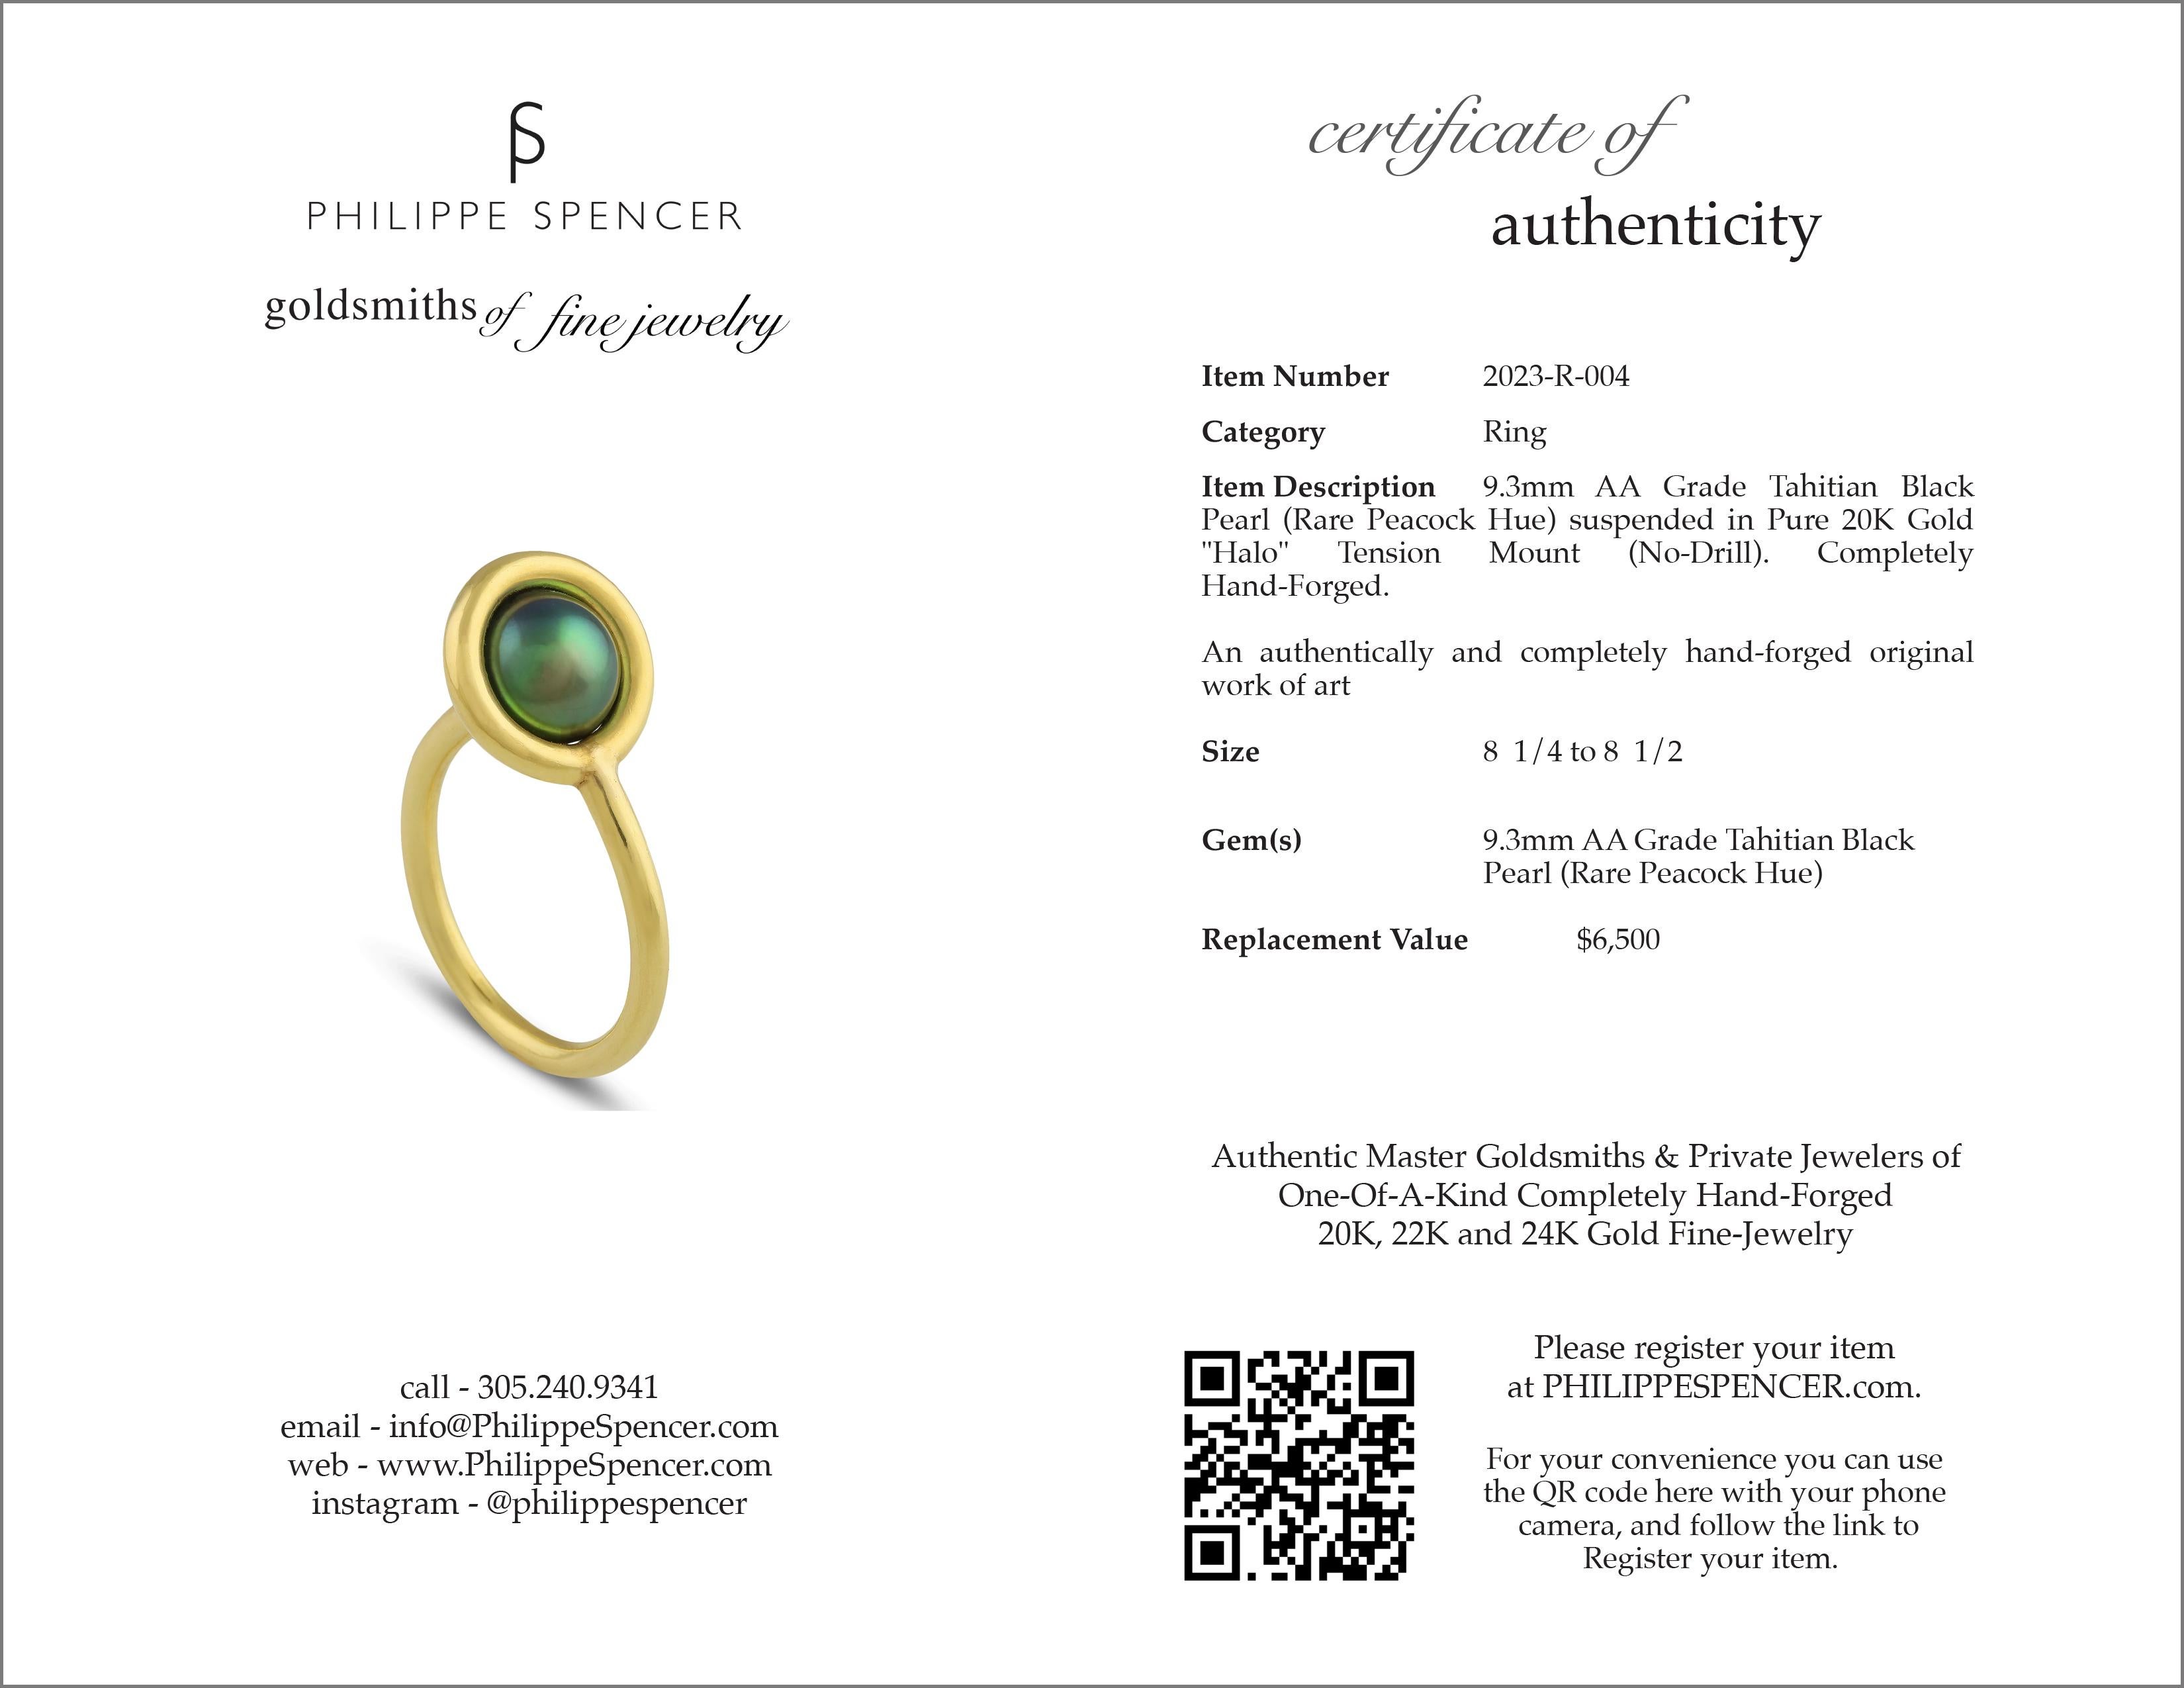 Round Cut PHILIPPE SPENCER 9.3mm Tahitian Pearl in Solid 20K Gold Halo Tension Ring For Sale